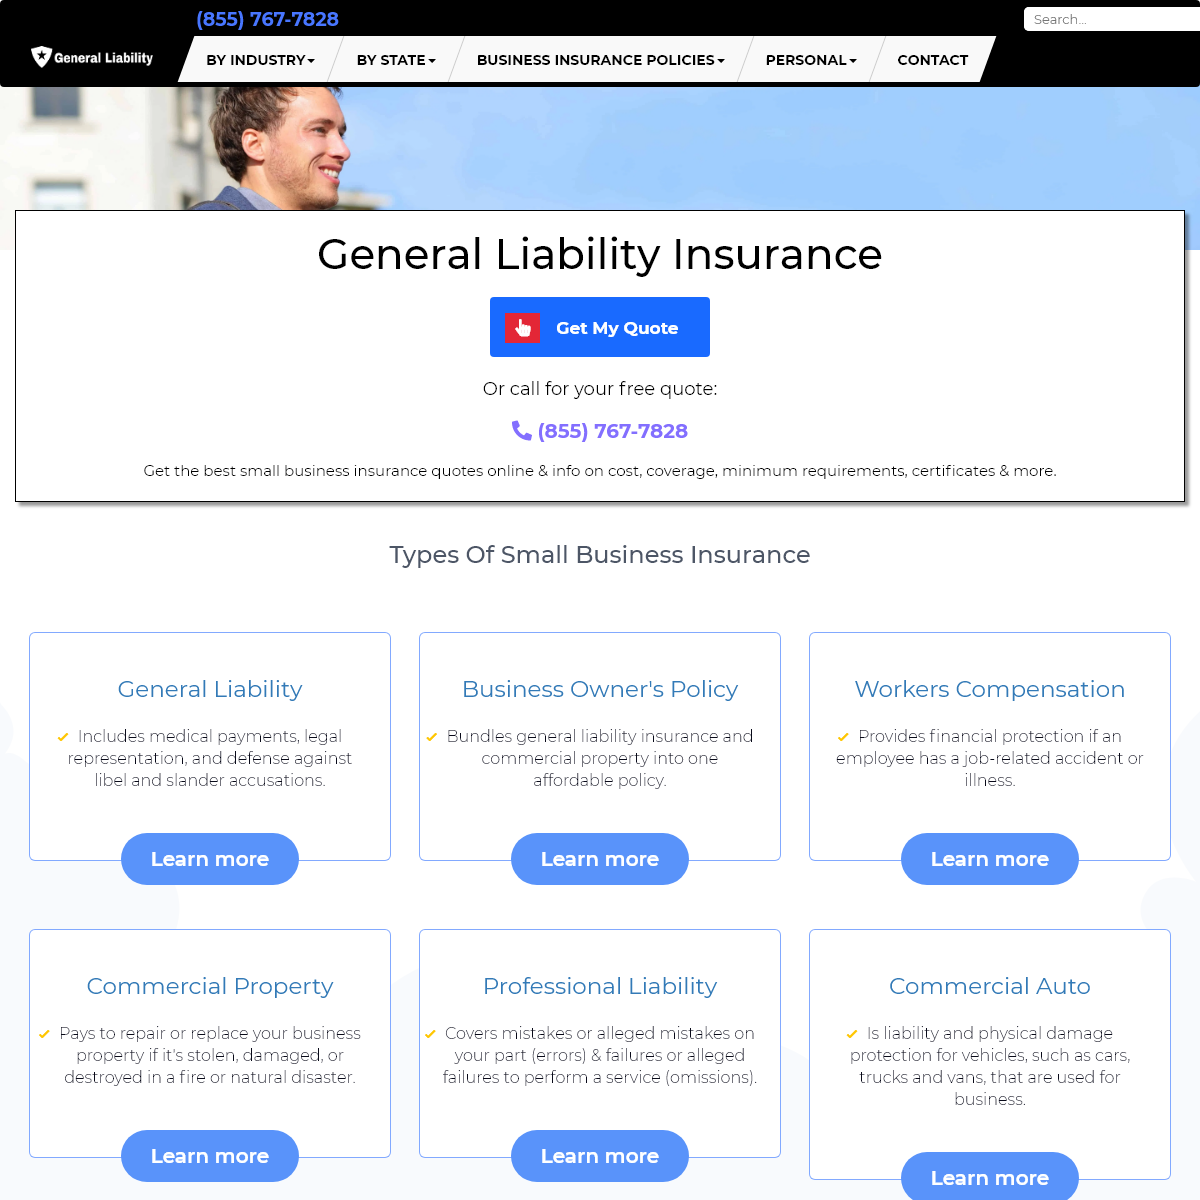 A complete backup of generalliabilityinsure.com